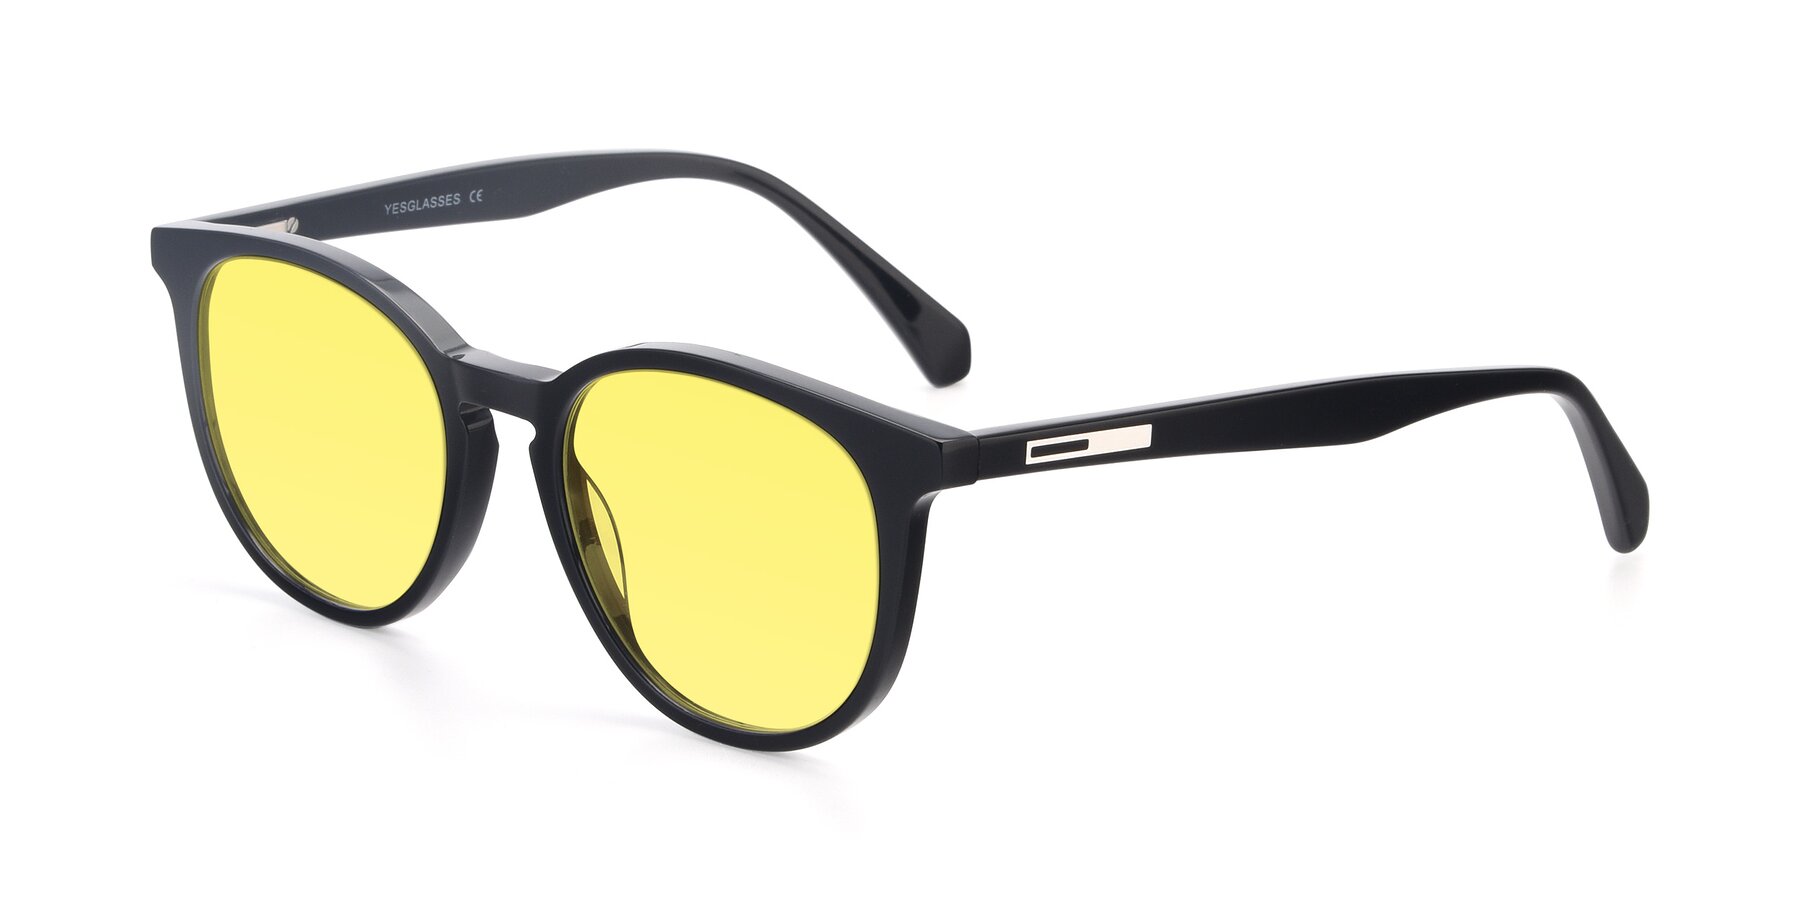 Angle of 17721 in Black with Medium Yellow Tinted Lenses